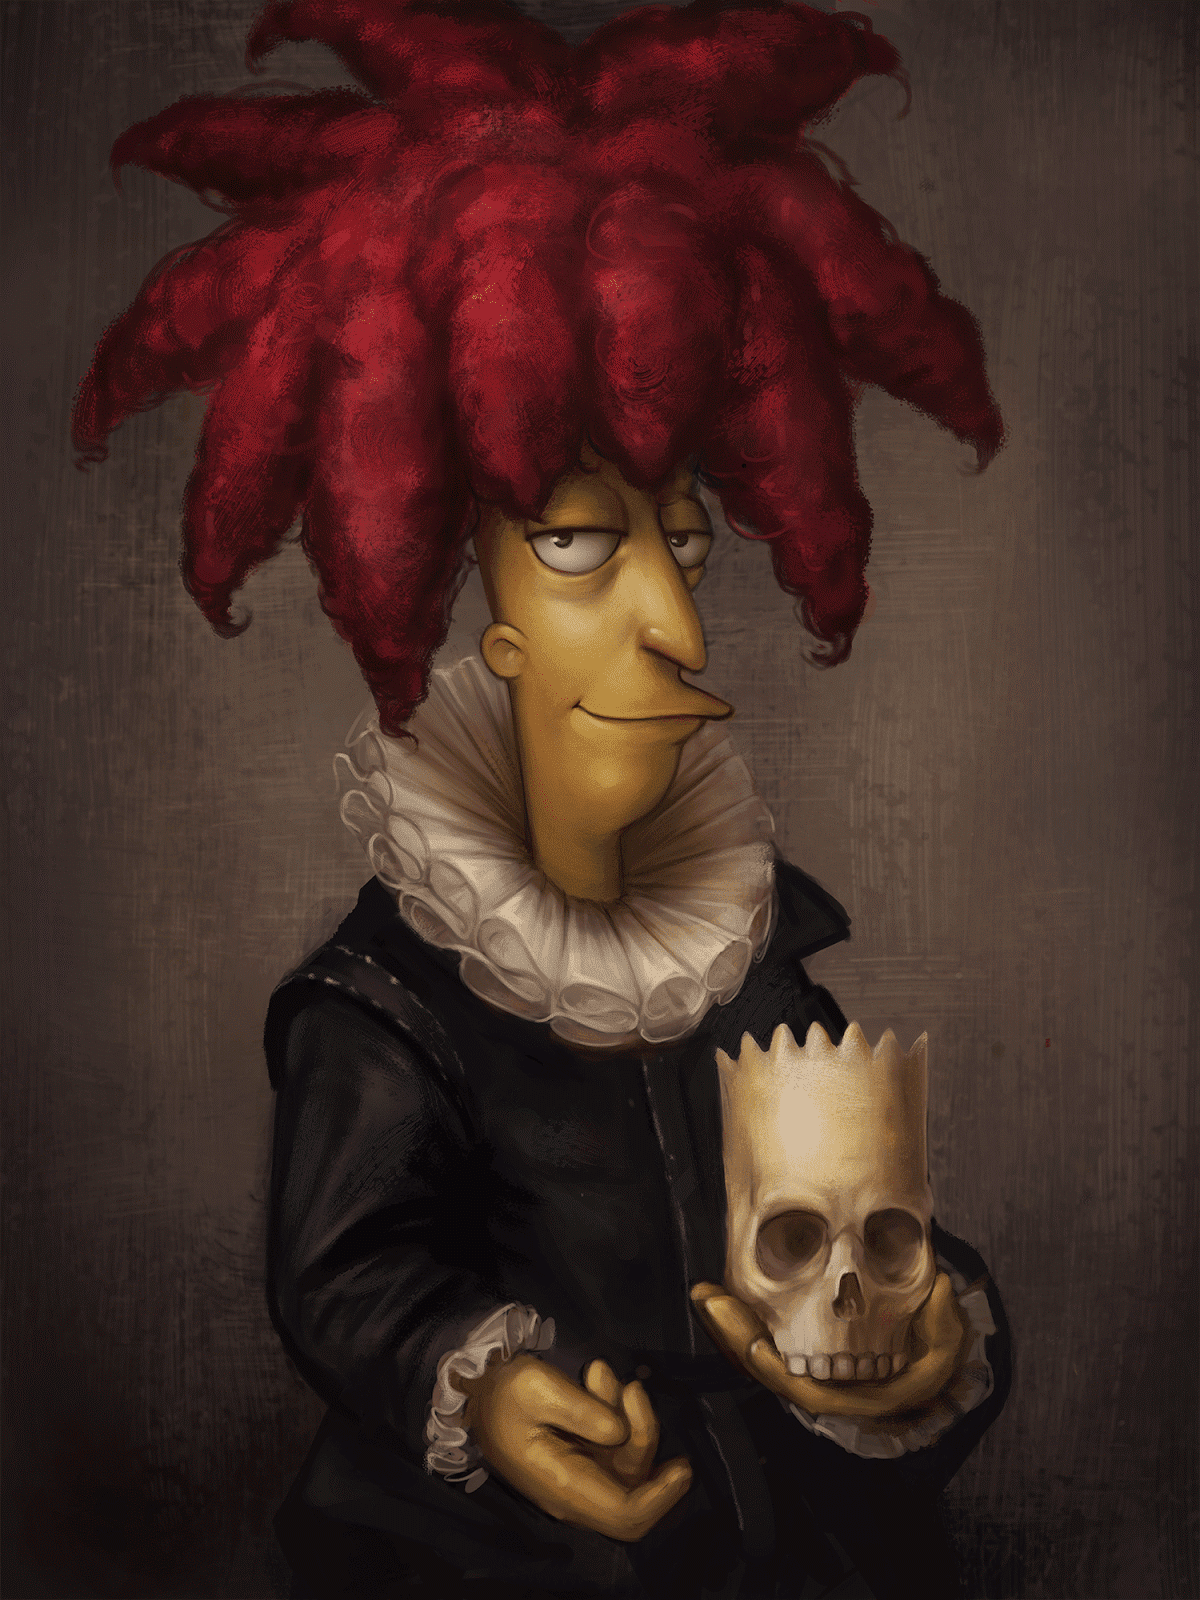 A portrait of Sideshow Bob for the "Eye on Springfield" Simpsons ...